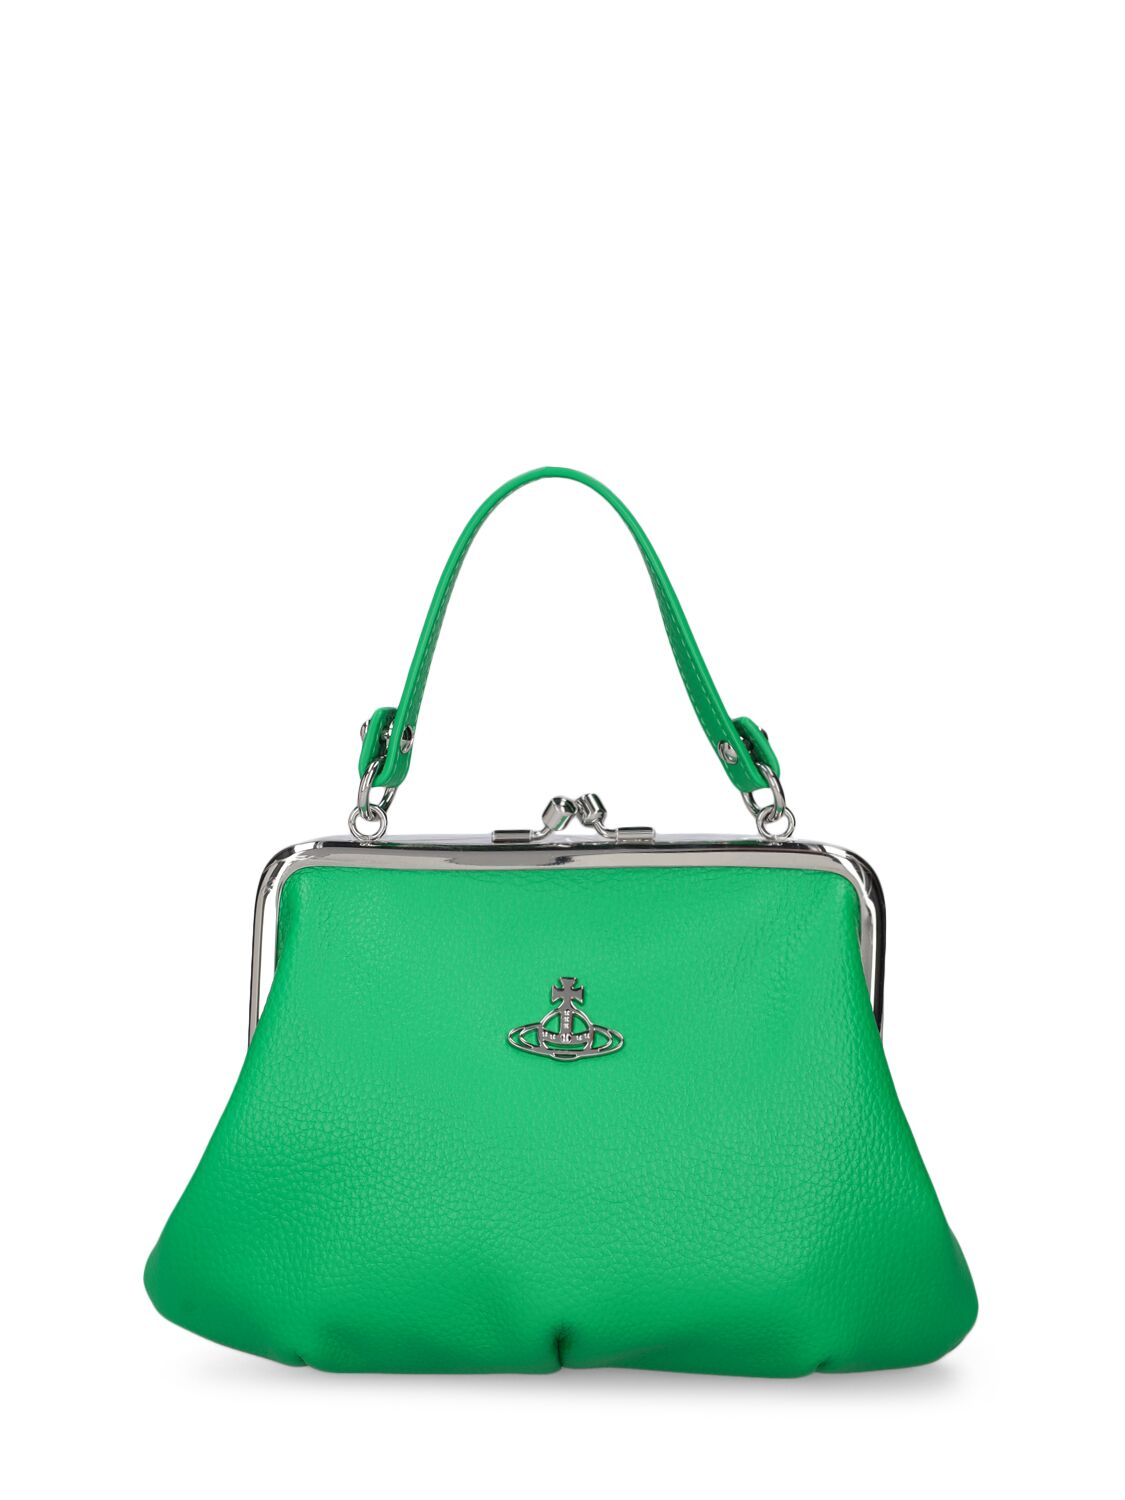 Vivienne Westwood Granny Frame Faux Leather Bag In Bright Green